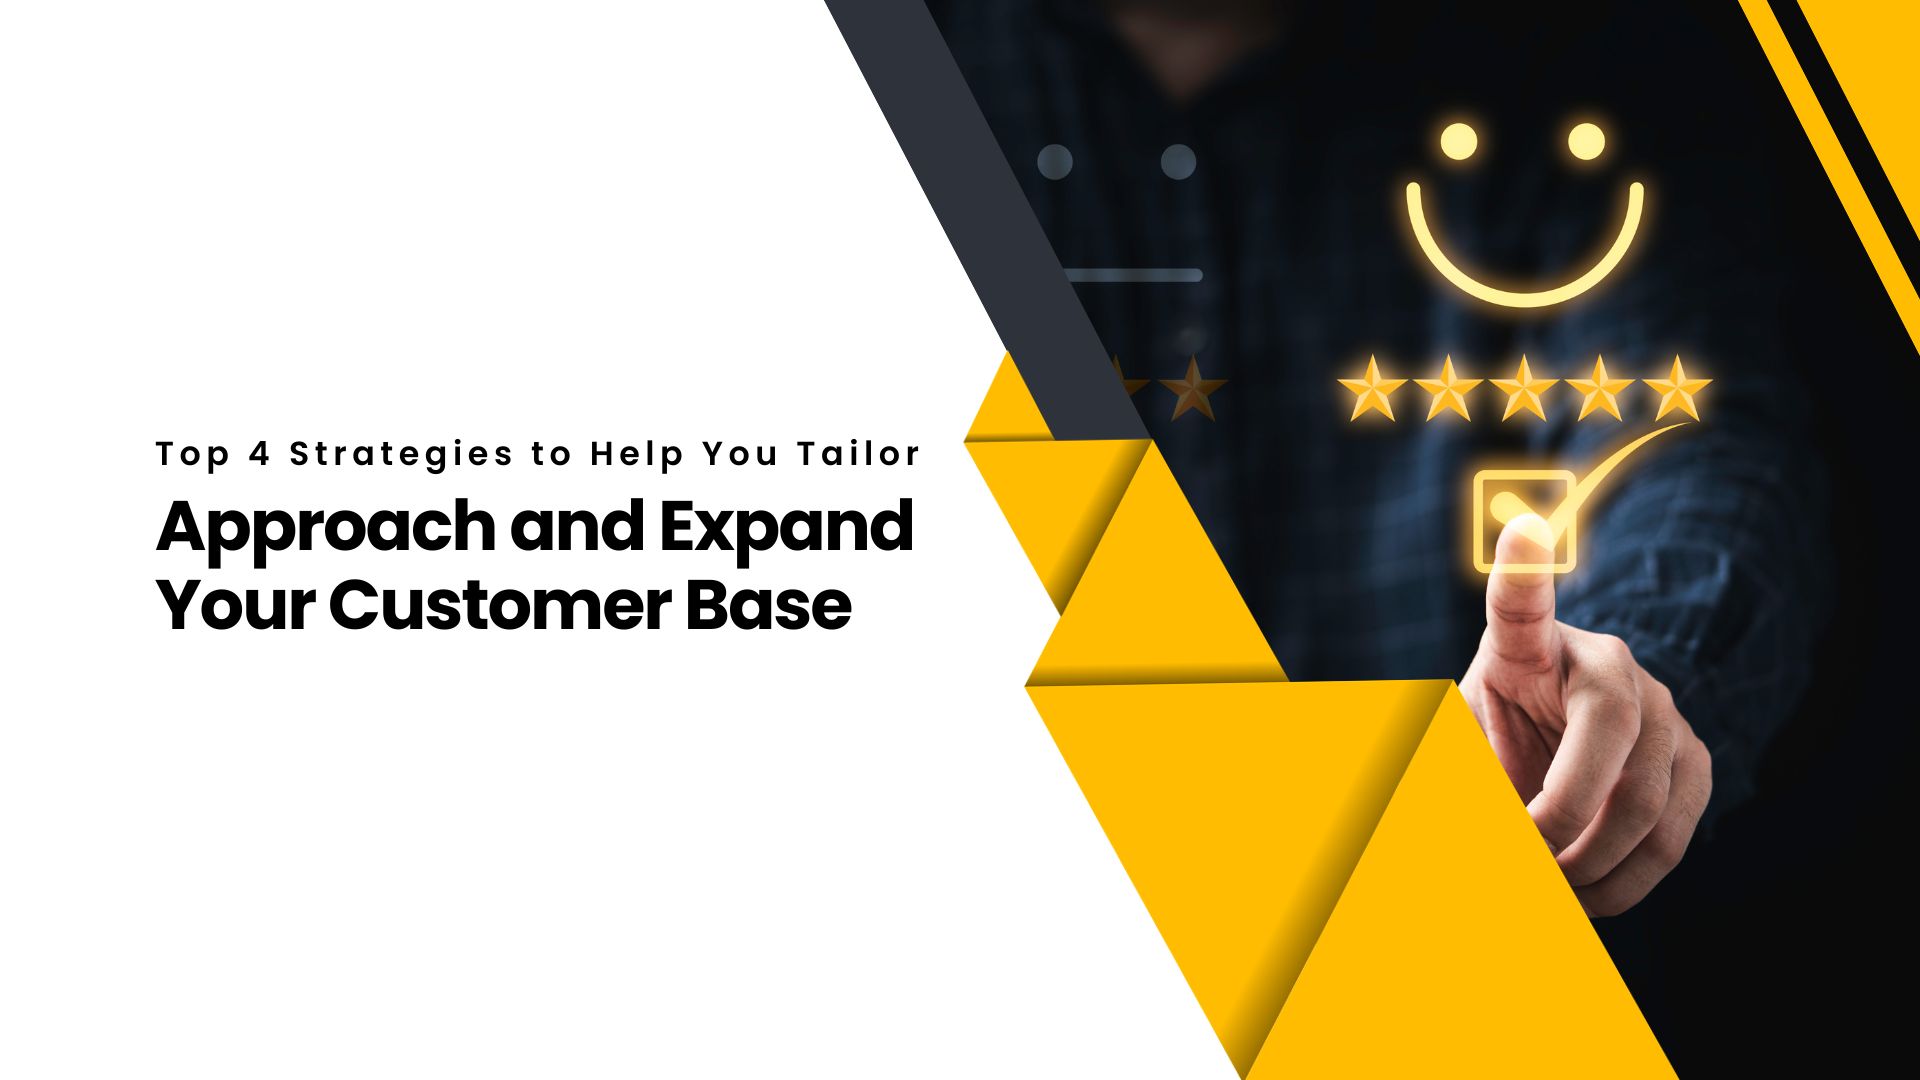 Top 4 Strategies to Help You Tailor Your Approach and Expand Your Customer Base